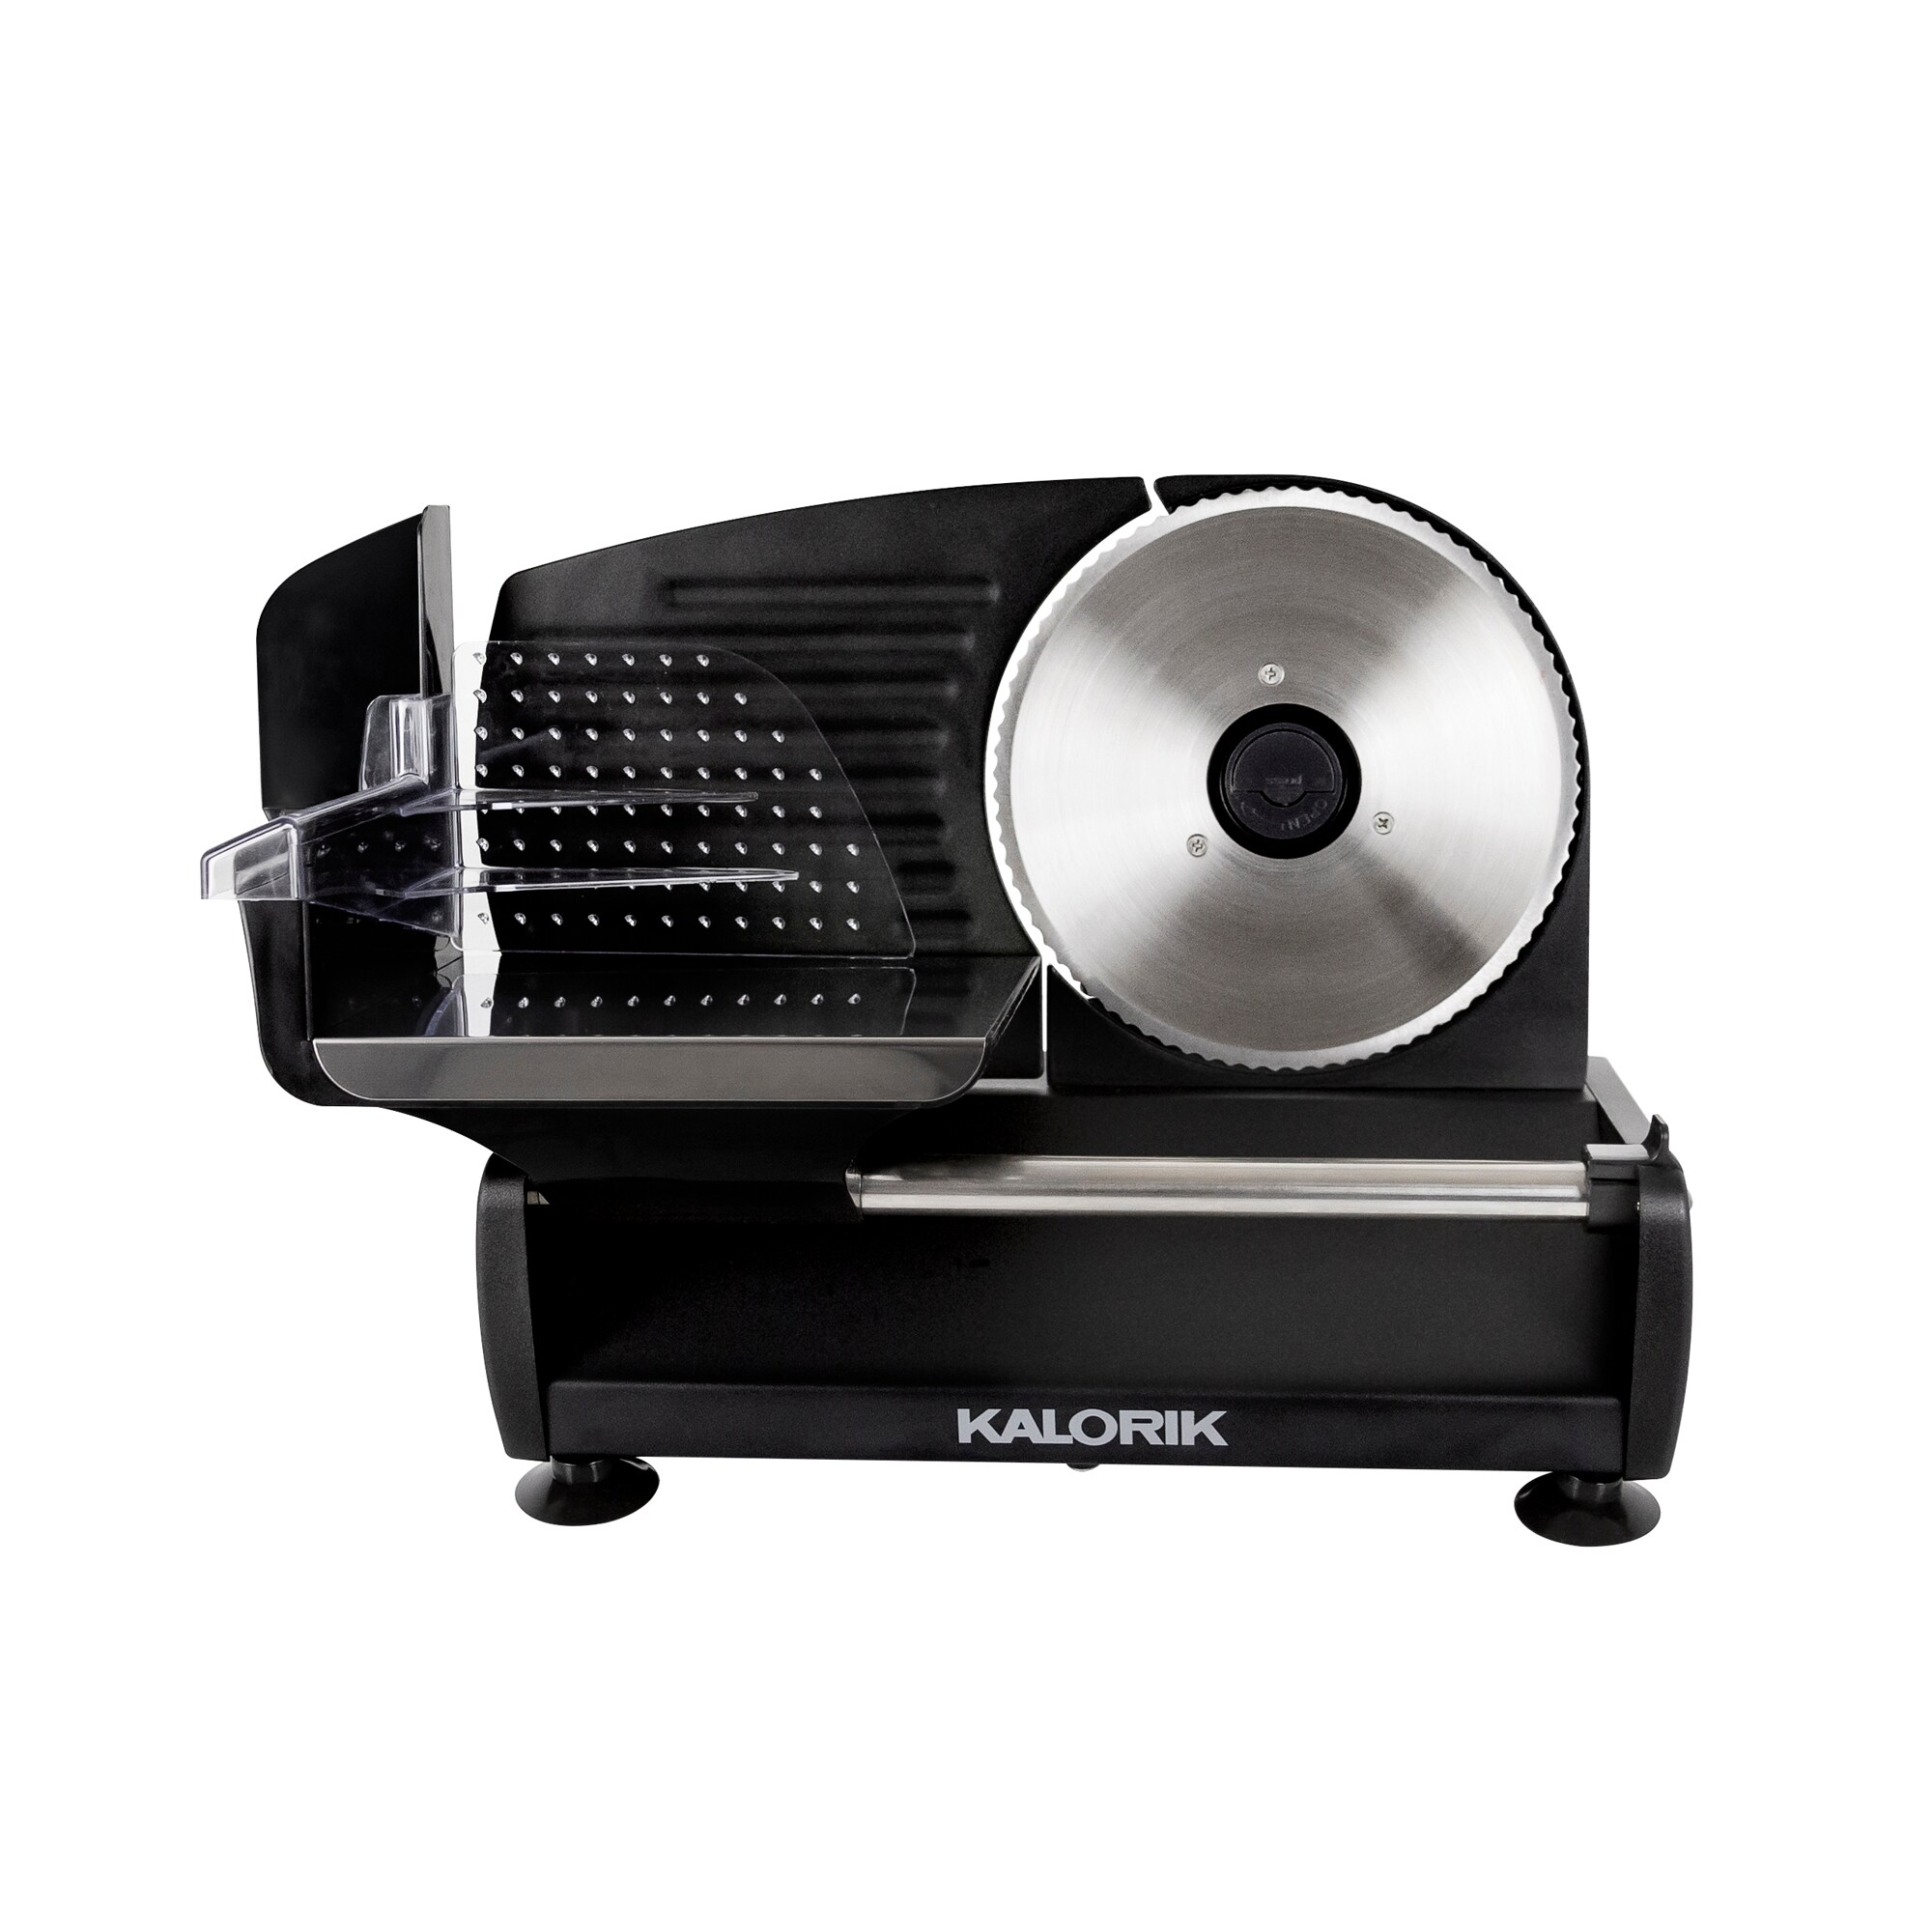 Lowe's] Cuisinart 2-Speed Silver Food Slicer ($25) or Stainless